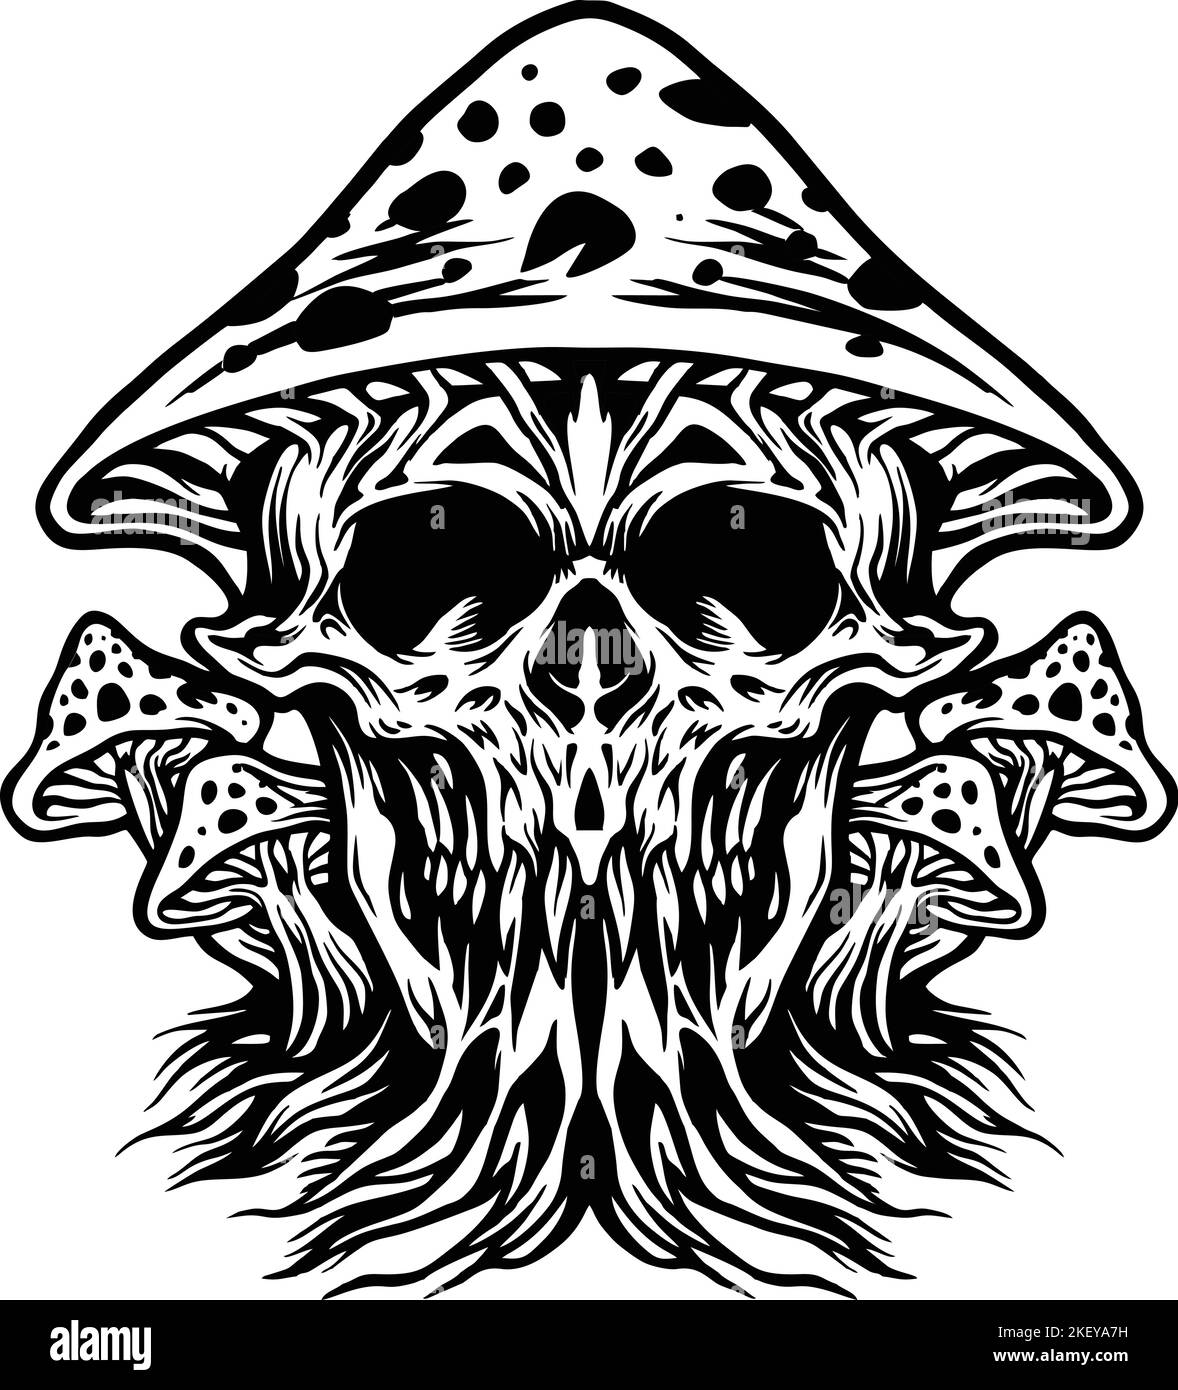 Zombie Scary Magic Mushrooms monochrome vector illustrations for your work logo, merchandise t-shirt, stickers and label designs, poster Stock Vector